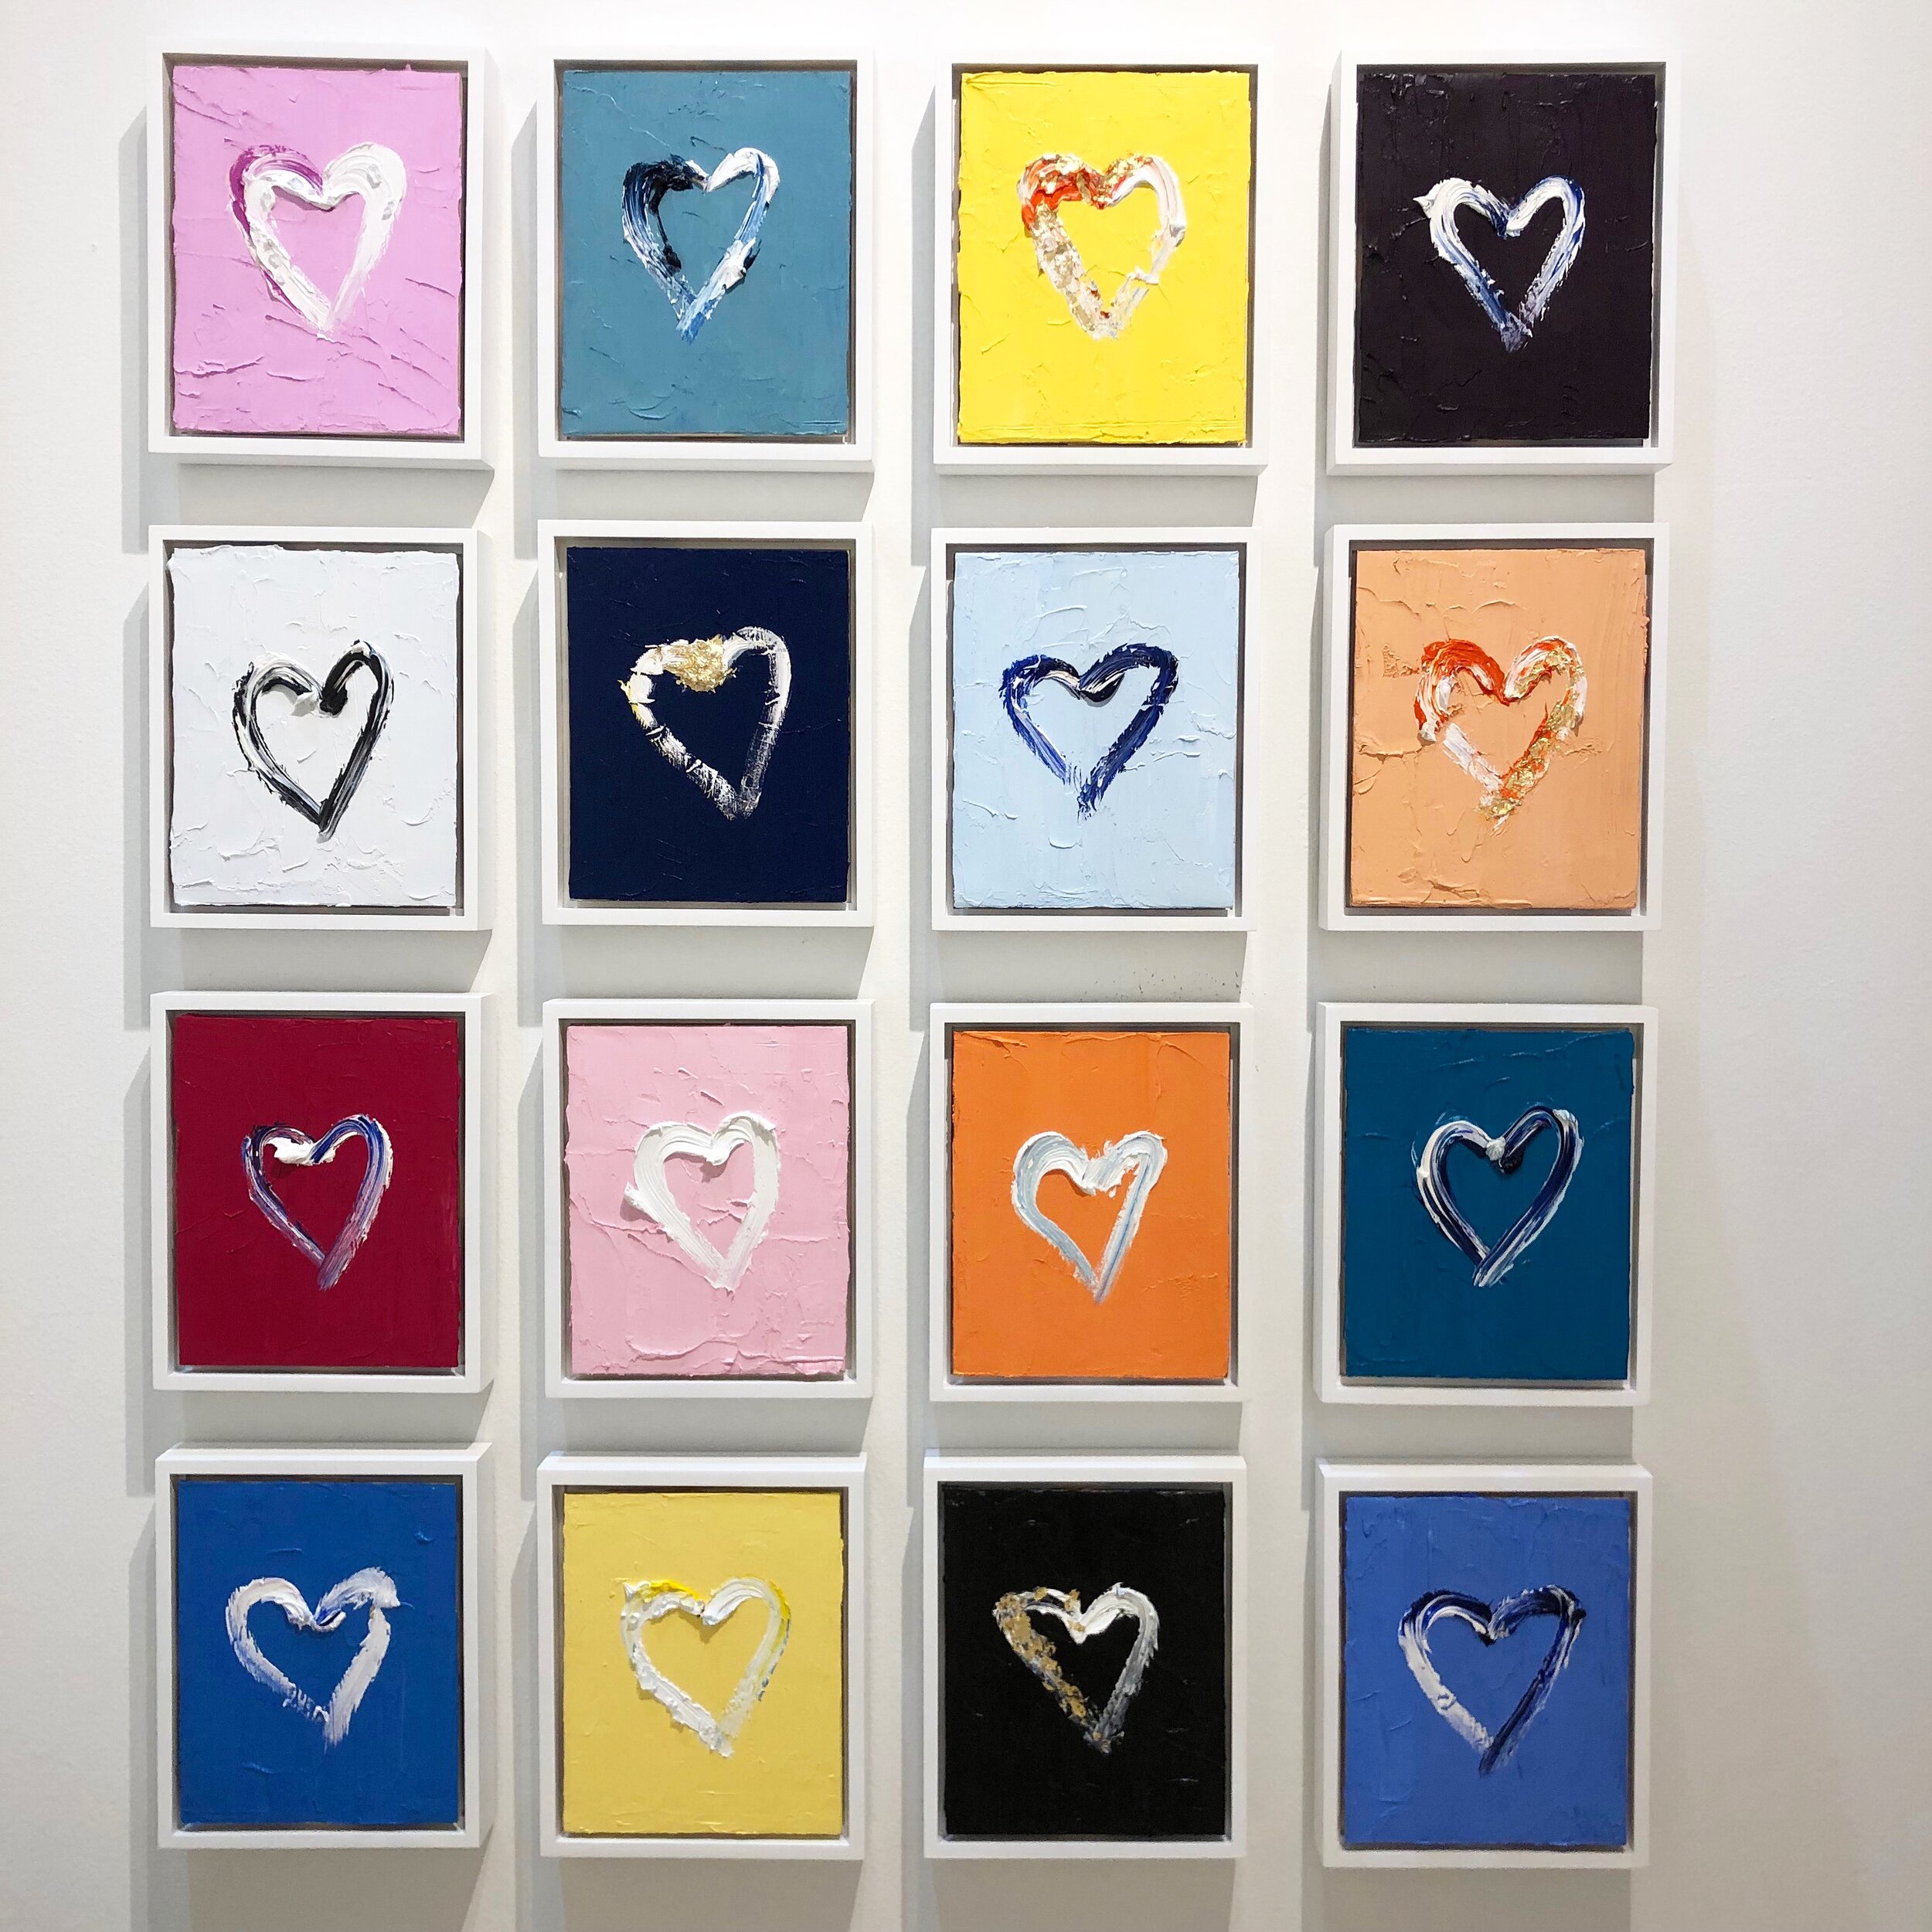 "My Heart Wall at Lilac Gallery" Exhibited Pieces